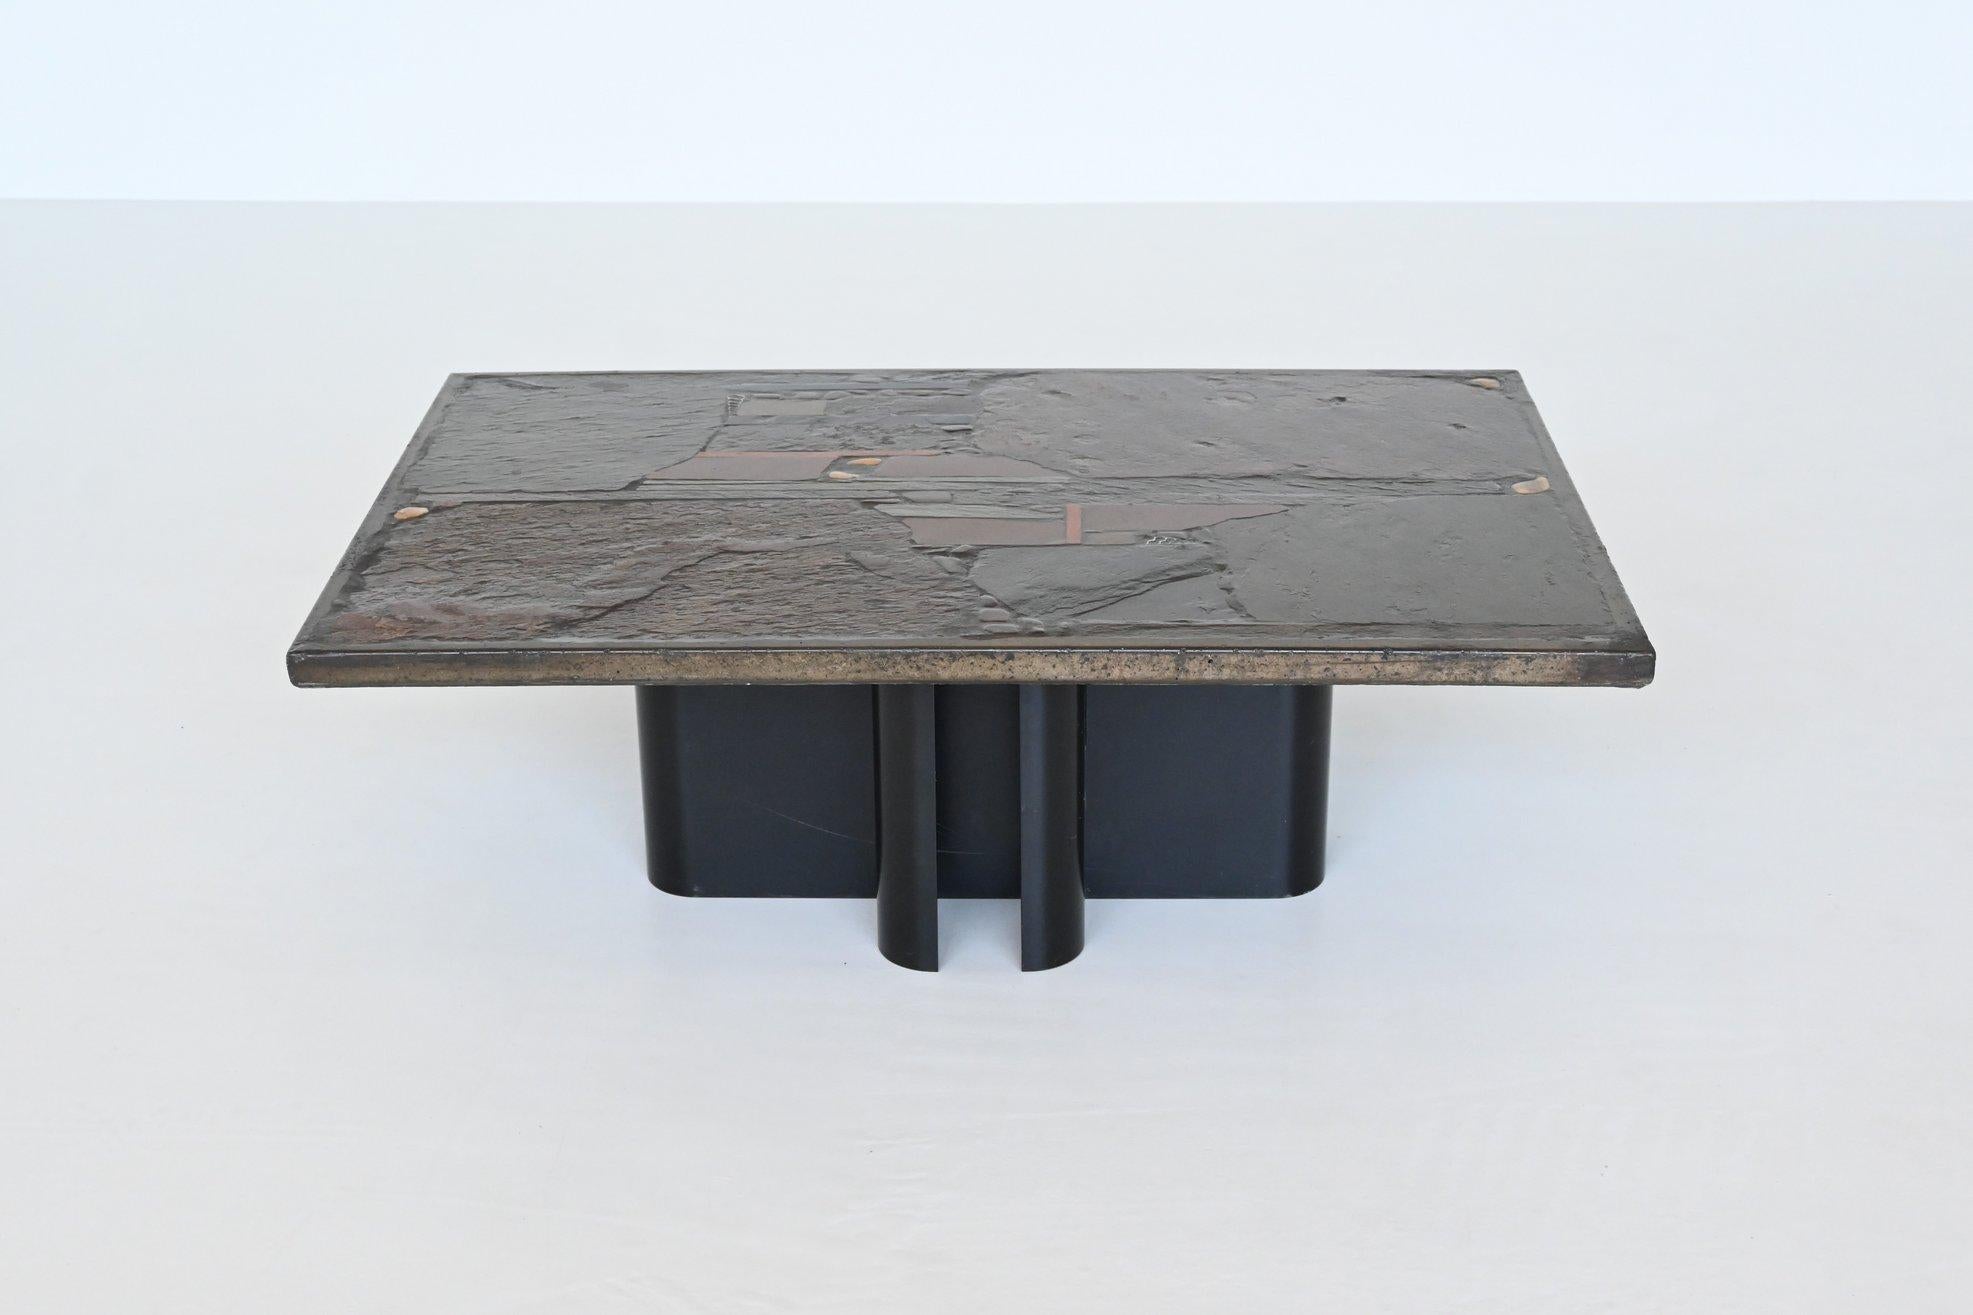 Beautiful rectangular shaped brutalist coffee table designed and made by Paul Kingma, The Netherlands 1970. The heavy concrete top rests on a black lacquered metal base. Beautiful composition of slate, stones, copper and brass makes this table a